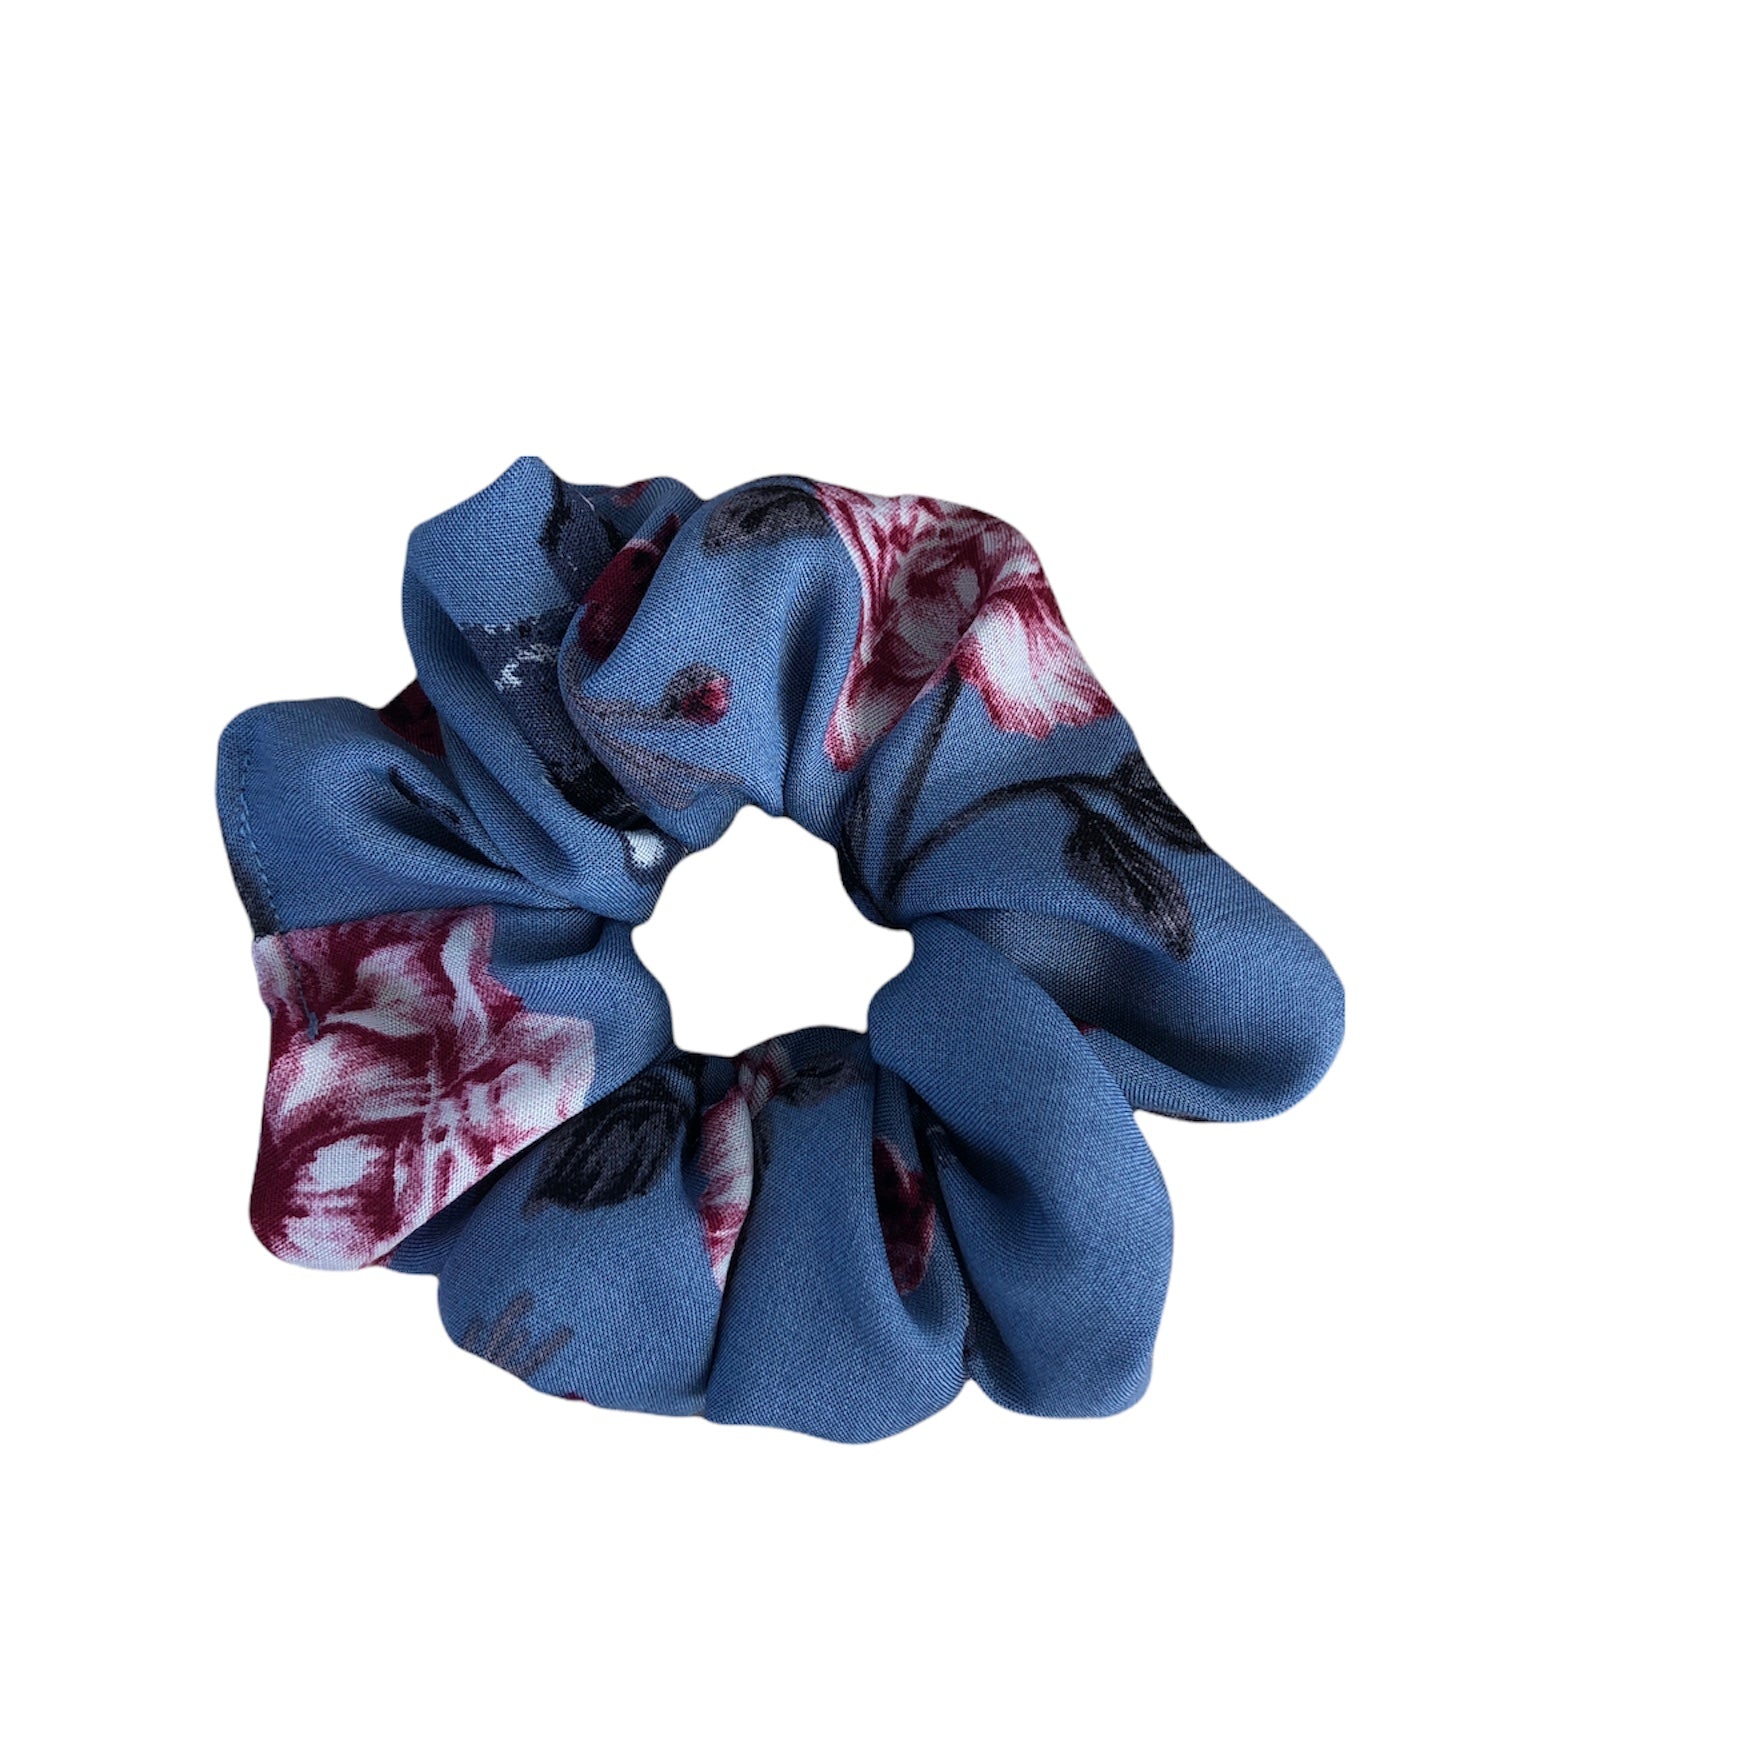 Regular Florence Scrunchie. An average sized periwinkle blue rayon scrunchie with floral accents. 